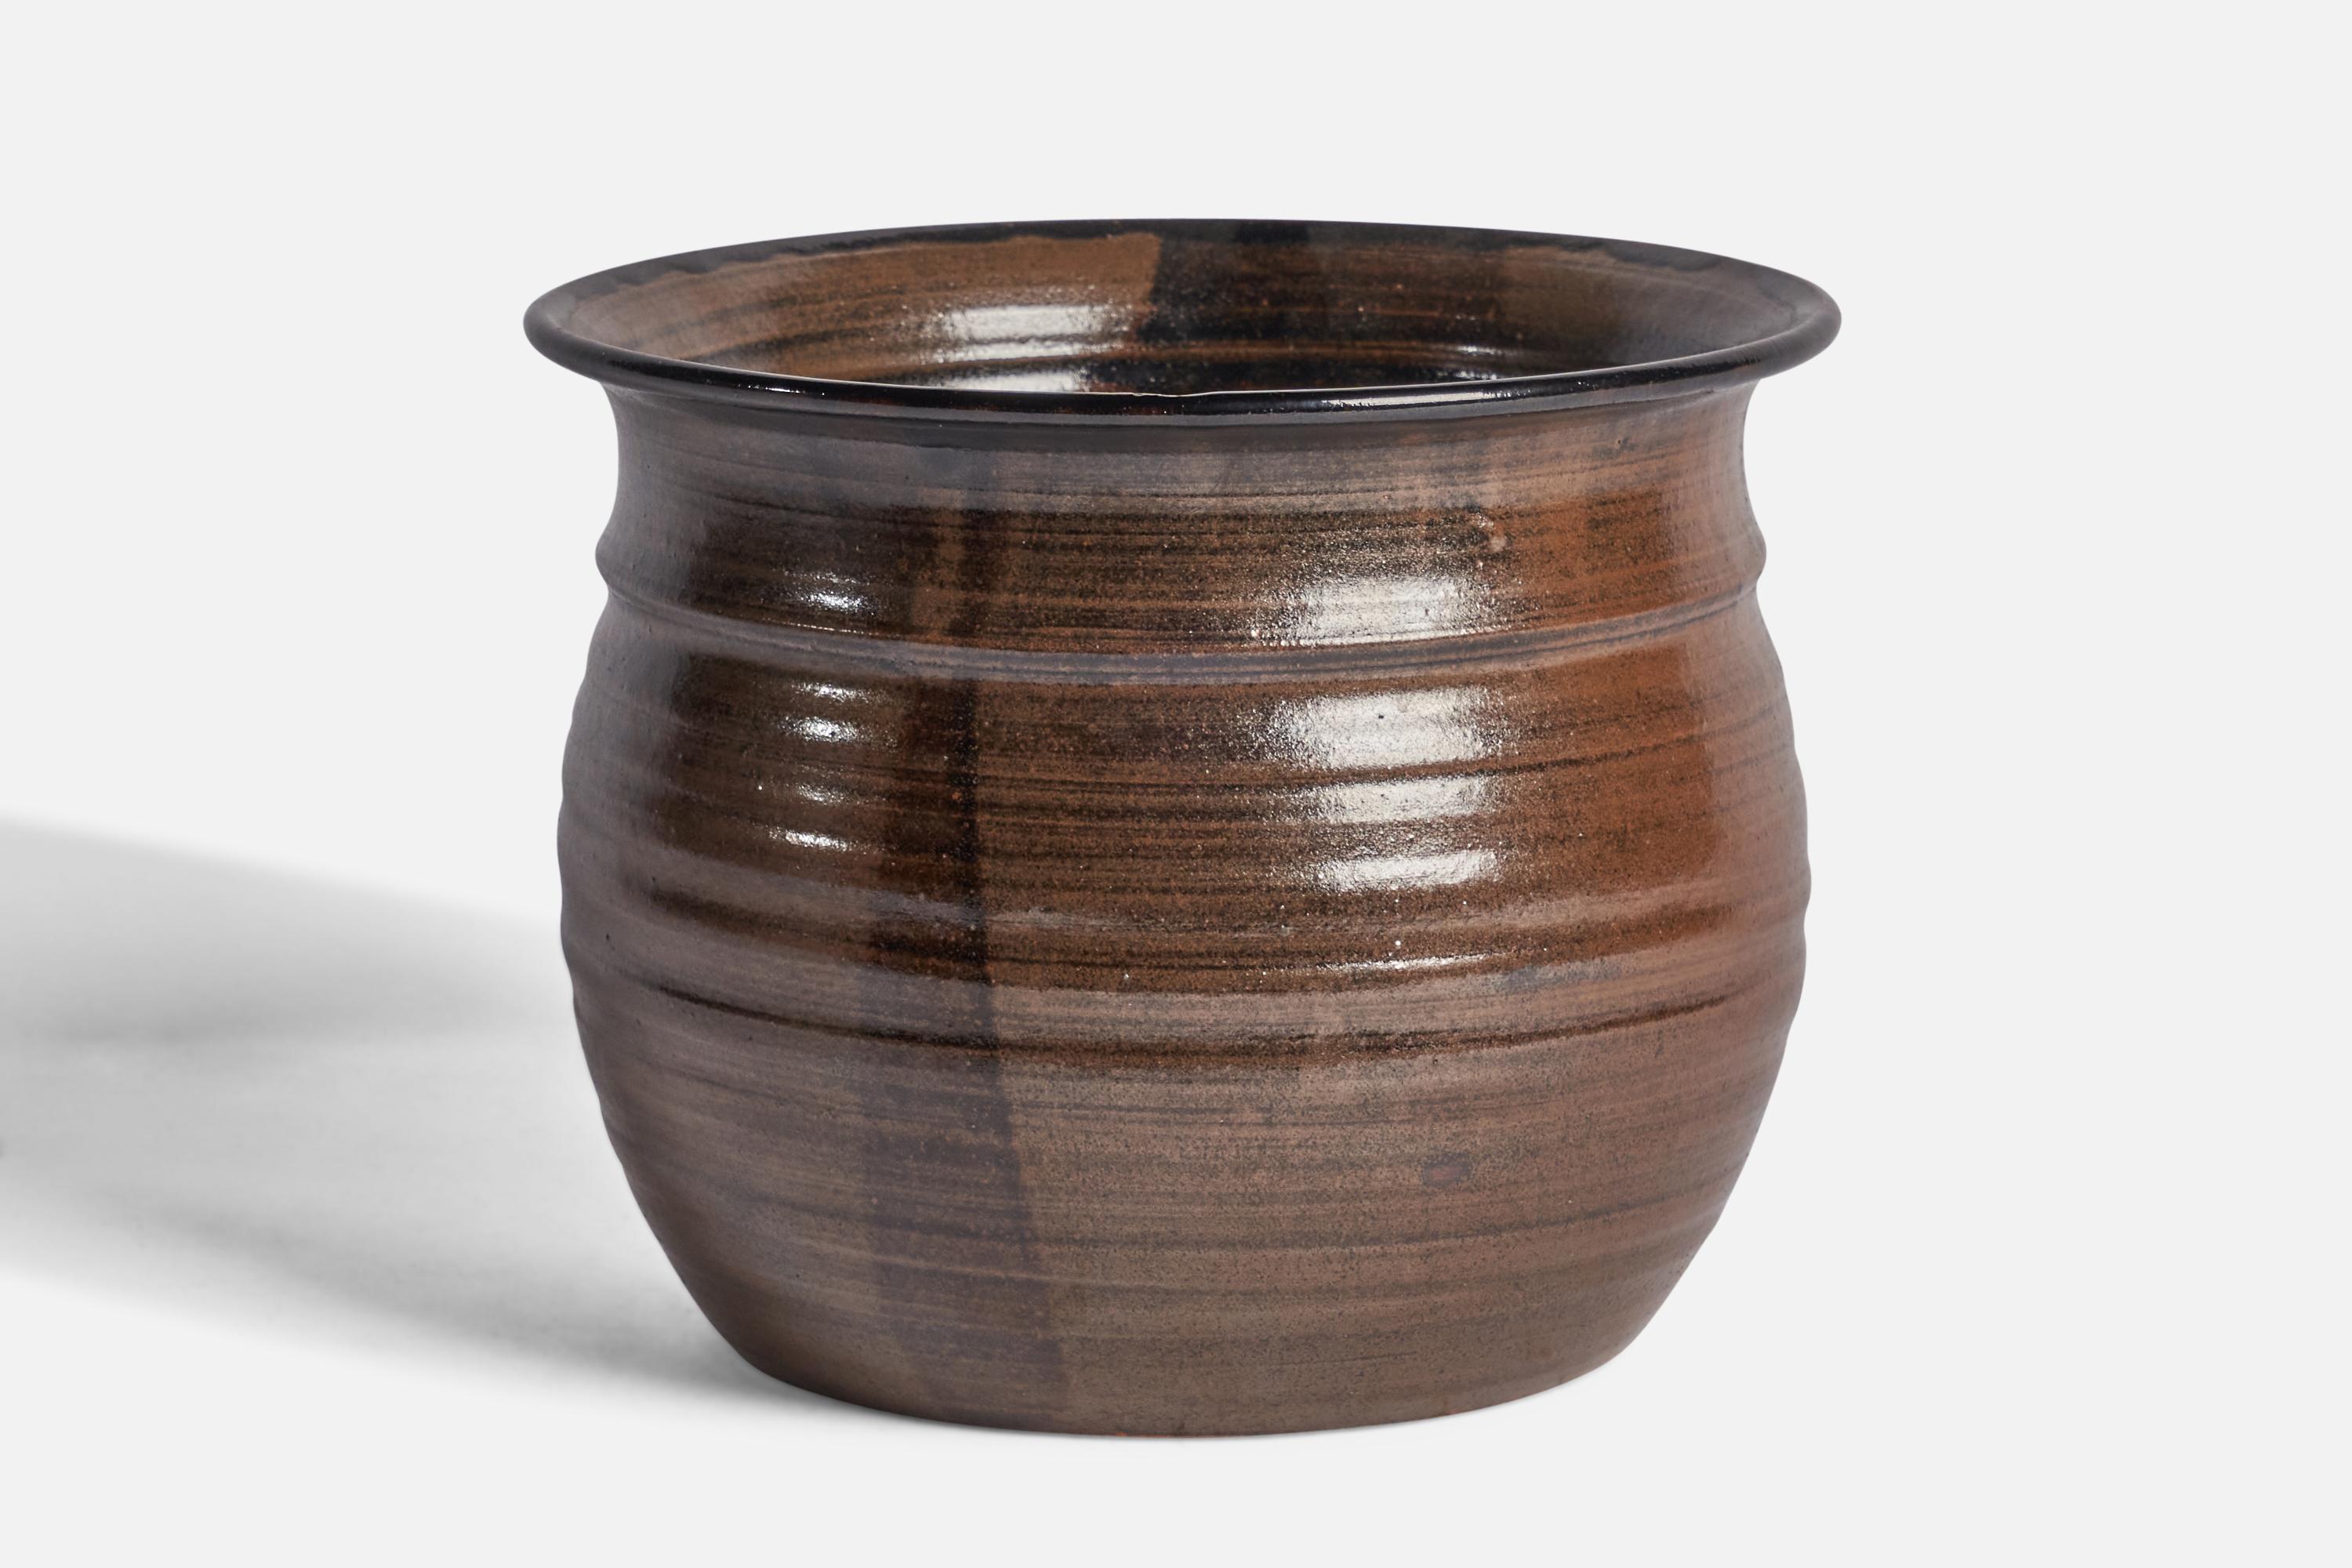 A brown-glazed stoneware vase designed and produced by Rolf Palm, Mölle, Sweden, 1970s.